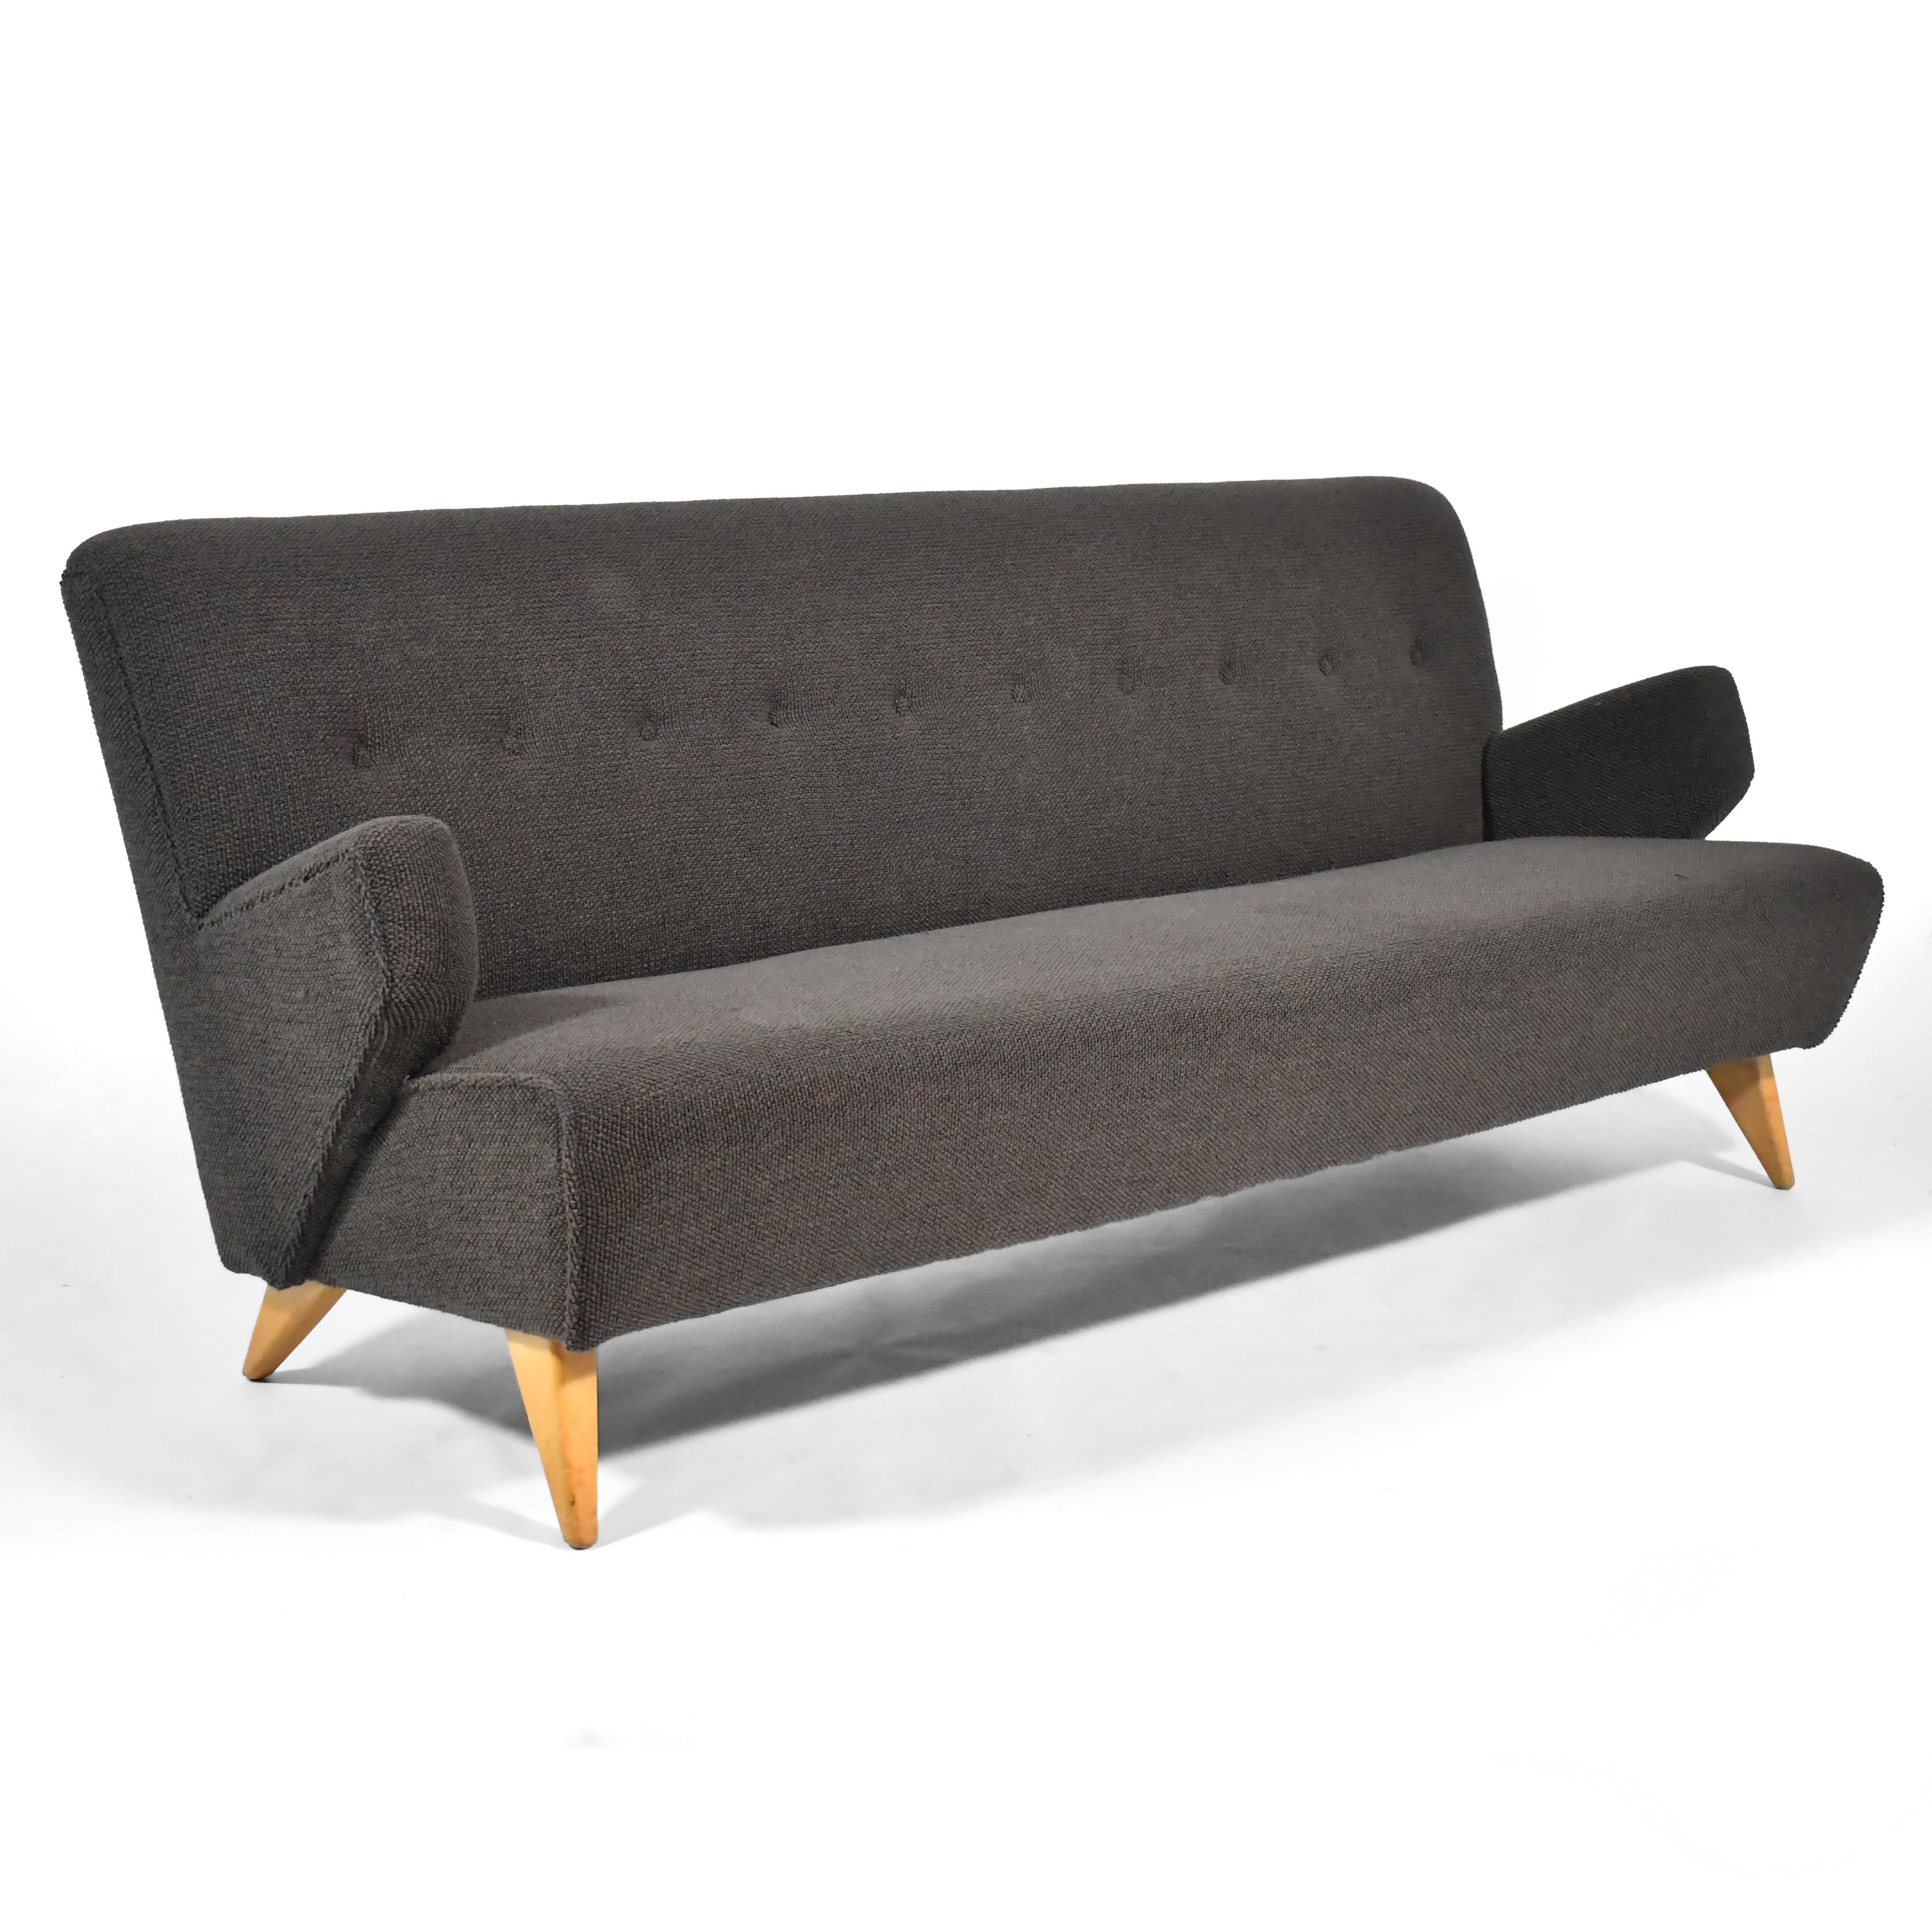 This early Risom model 37 sofa for Knoll is classic mid-century. Designed in 1946, the dynamic, but restrained form speaks to Risom's Scandinavian heritage. The upholstered body is supported by splayed tapered birch legs. The seat and back have